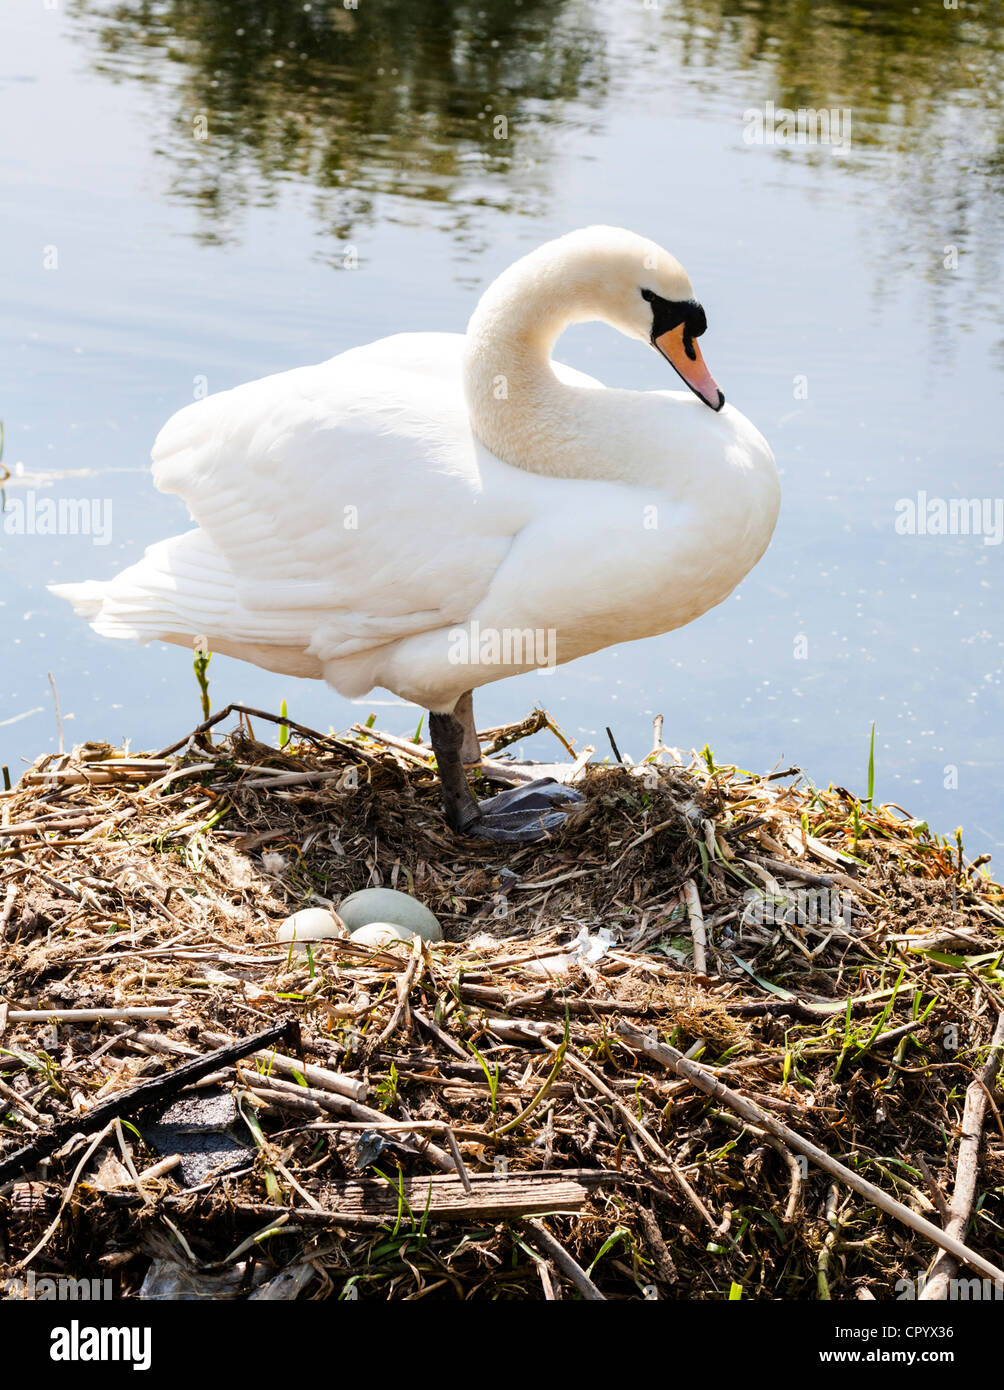 A Mute Swan standing on its nest containing eggs, Britain. Stock Photo